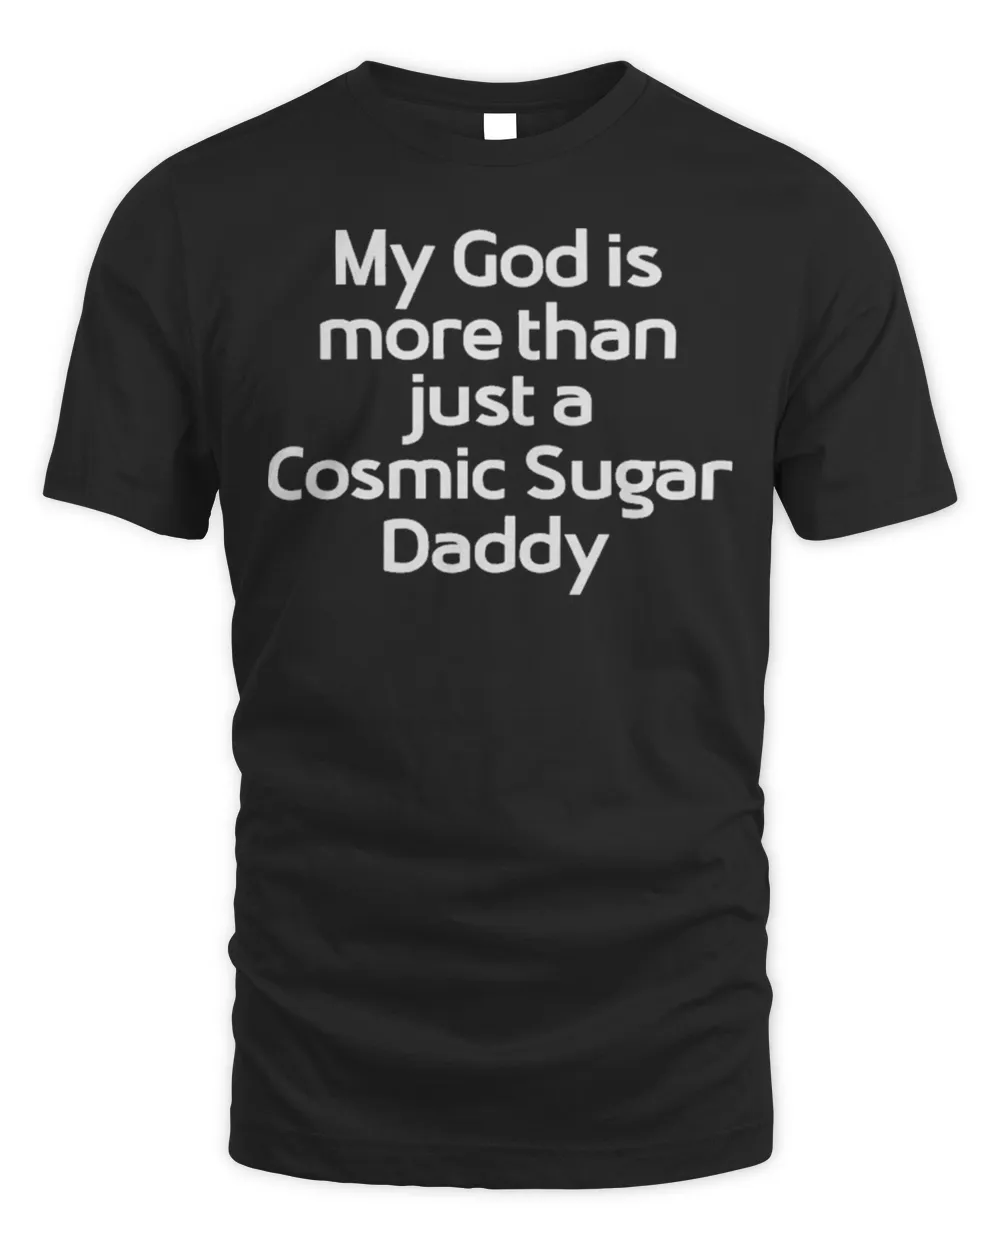 My god is more than just a cosmic sugar daddy new shirt